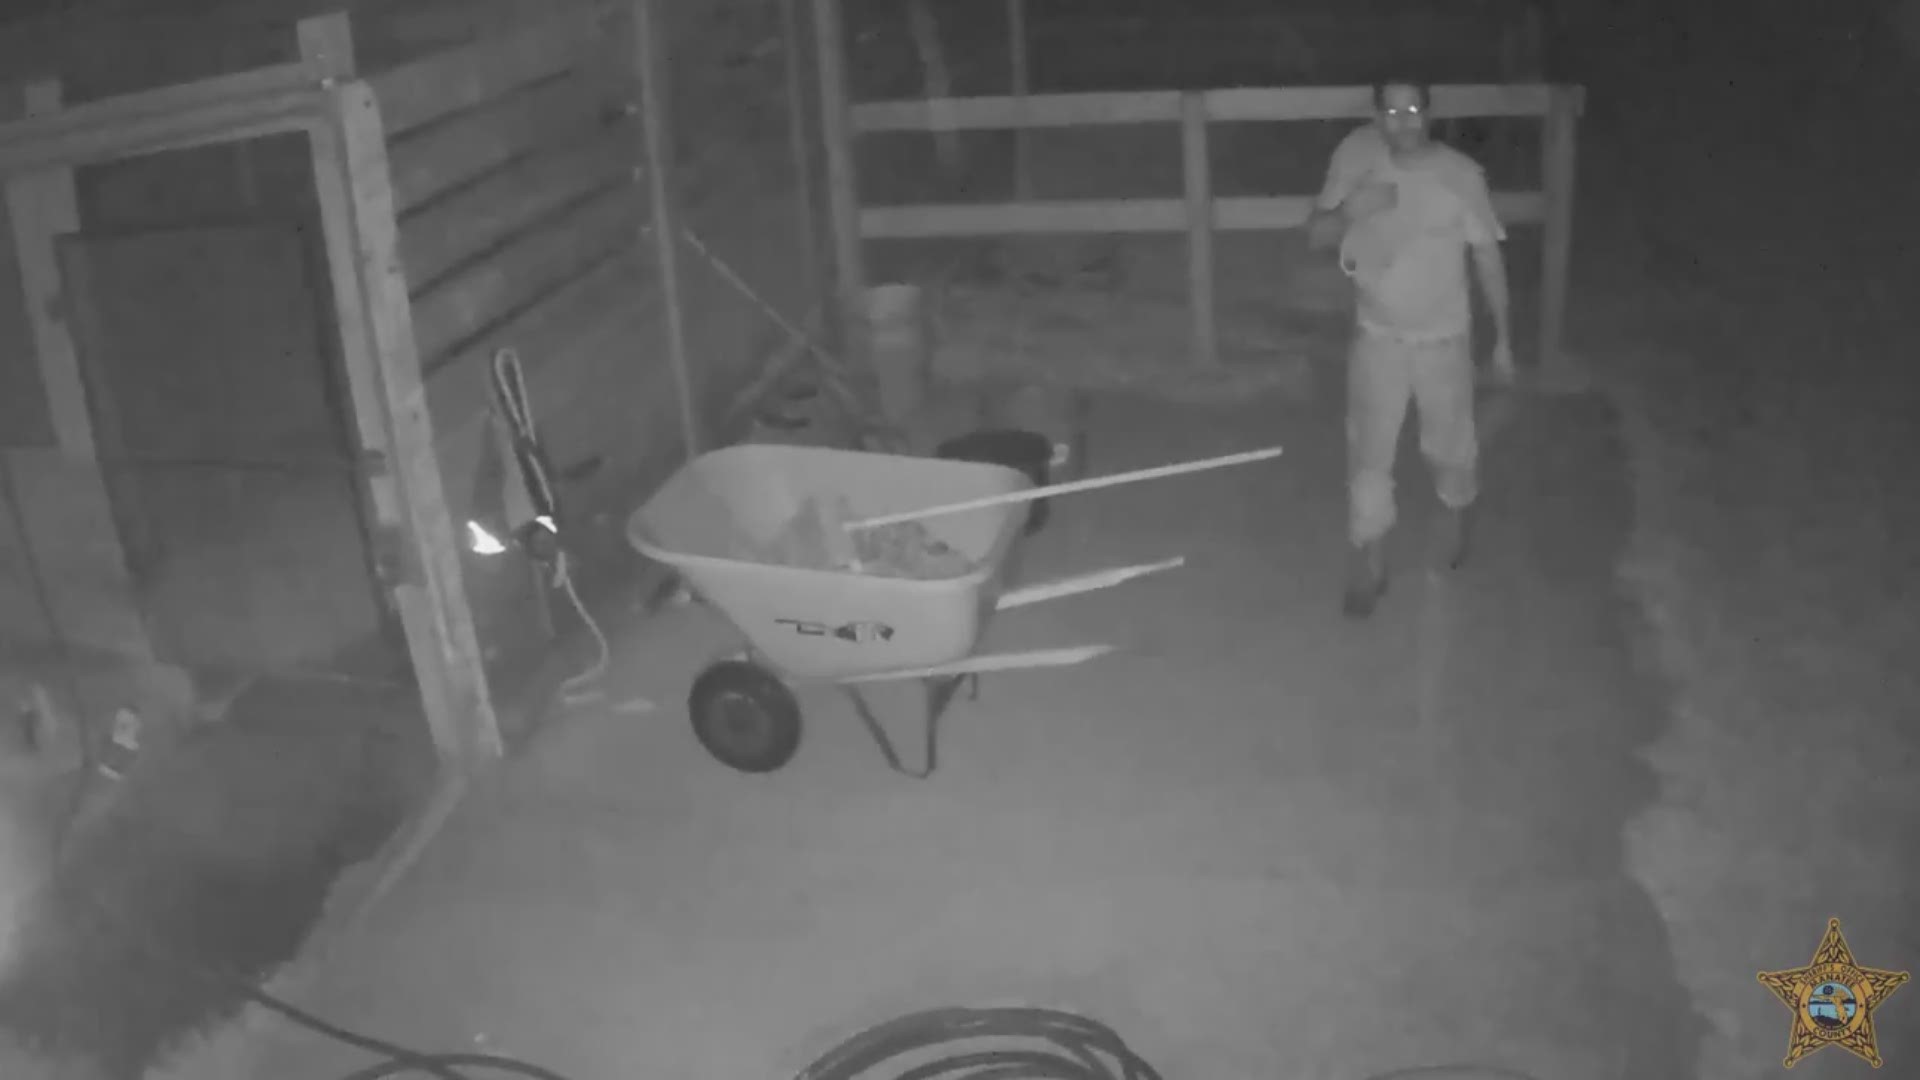 The Manatee County Sheriff's Office has released video of a "person of interest" seen walking up to stables where a horse was stolen and later slaughtered.